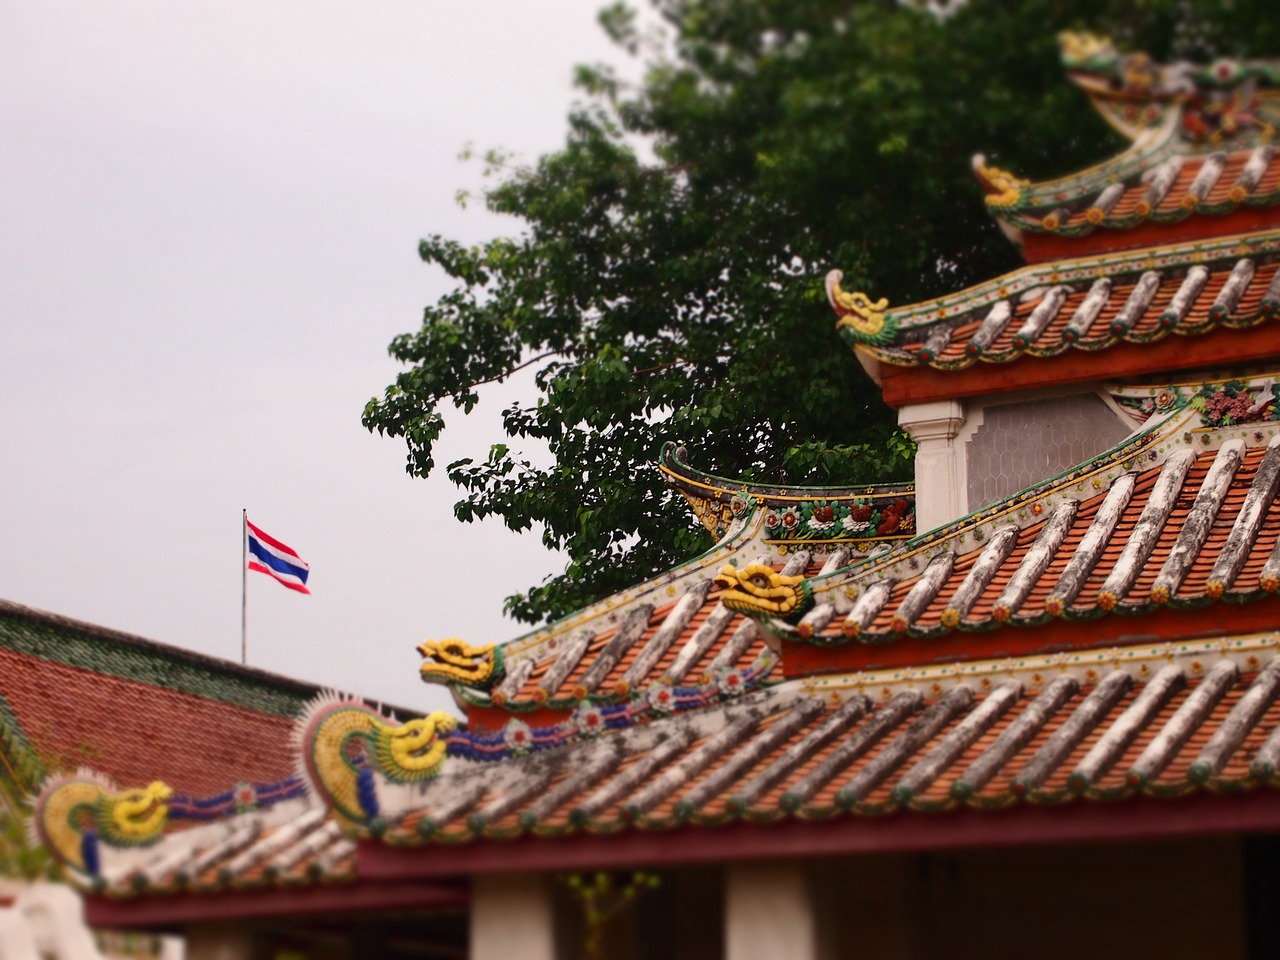 roof temple dragons free photo